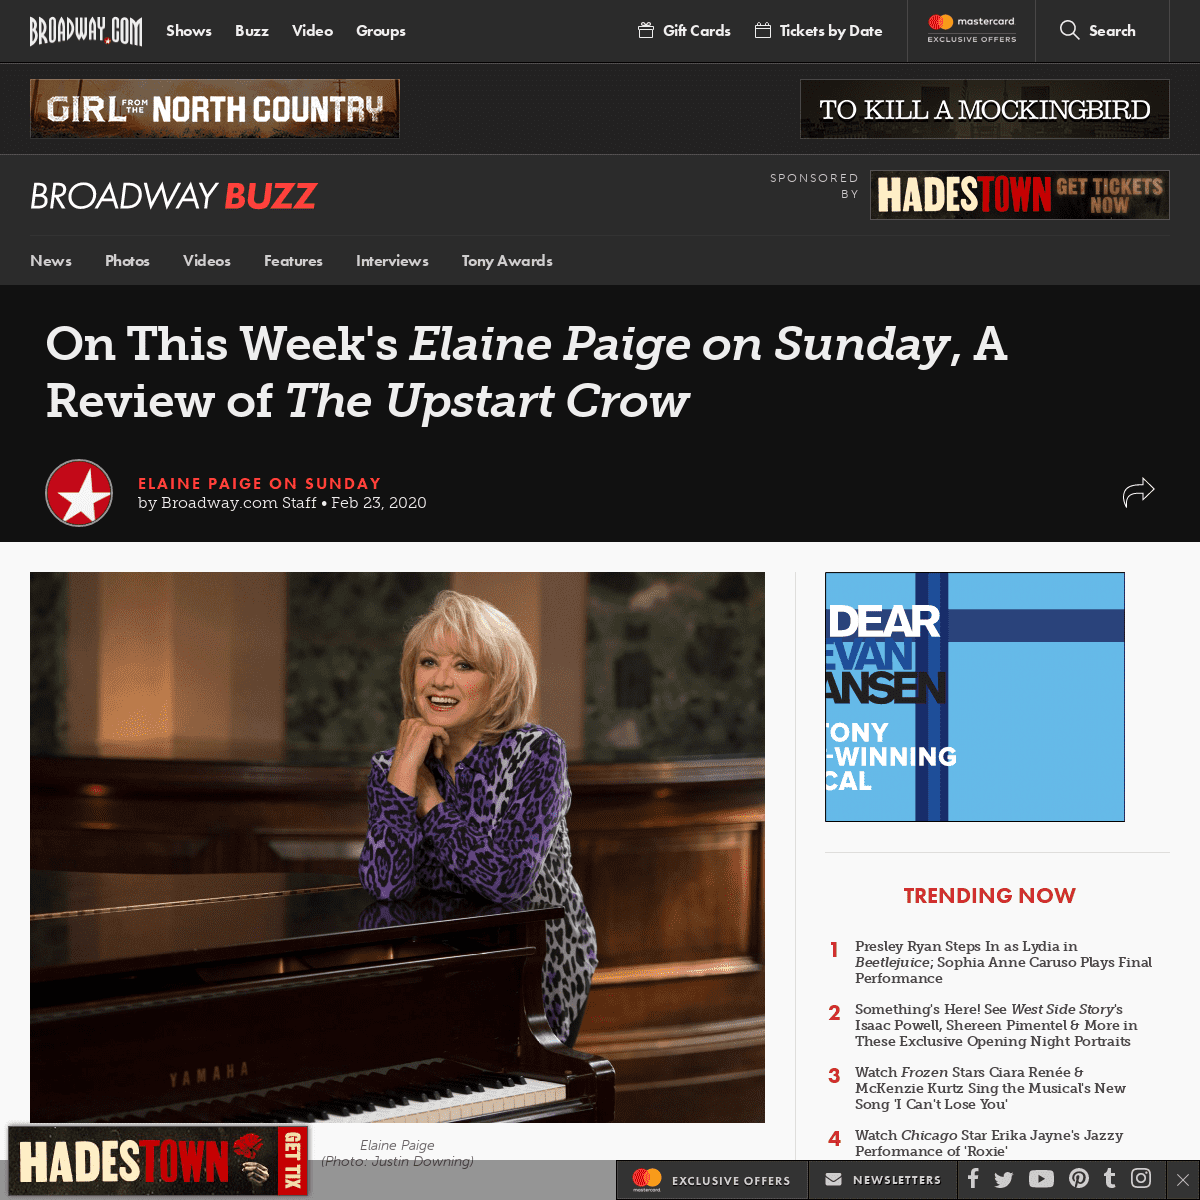 A complete backup of www.broadway.com/buzz/198527/on-this-weeks-elaine-paige-on-sunday-a-review-of-the-upstart-crow/